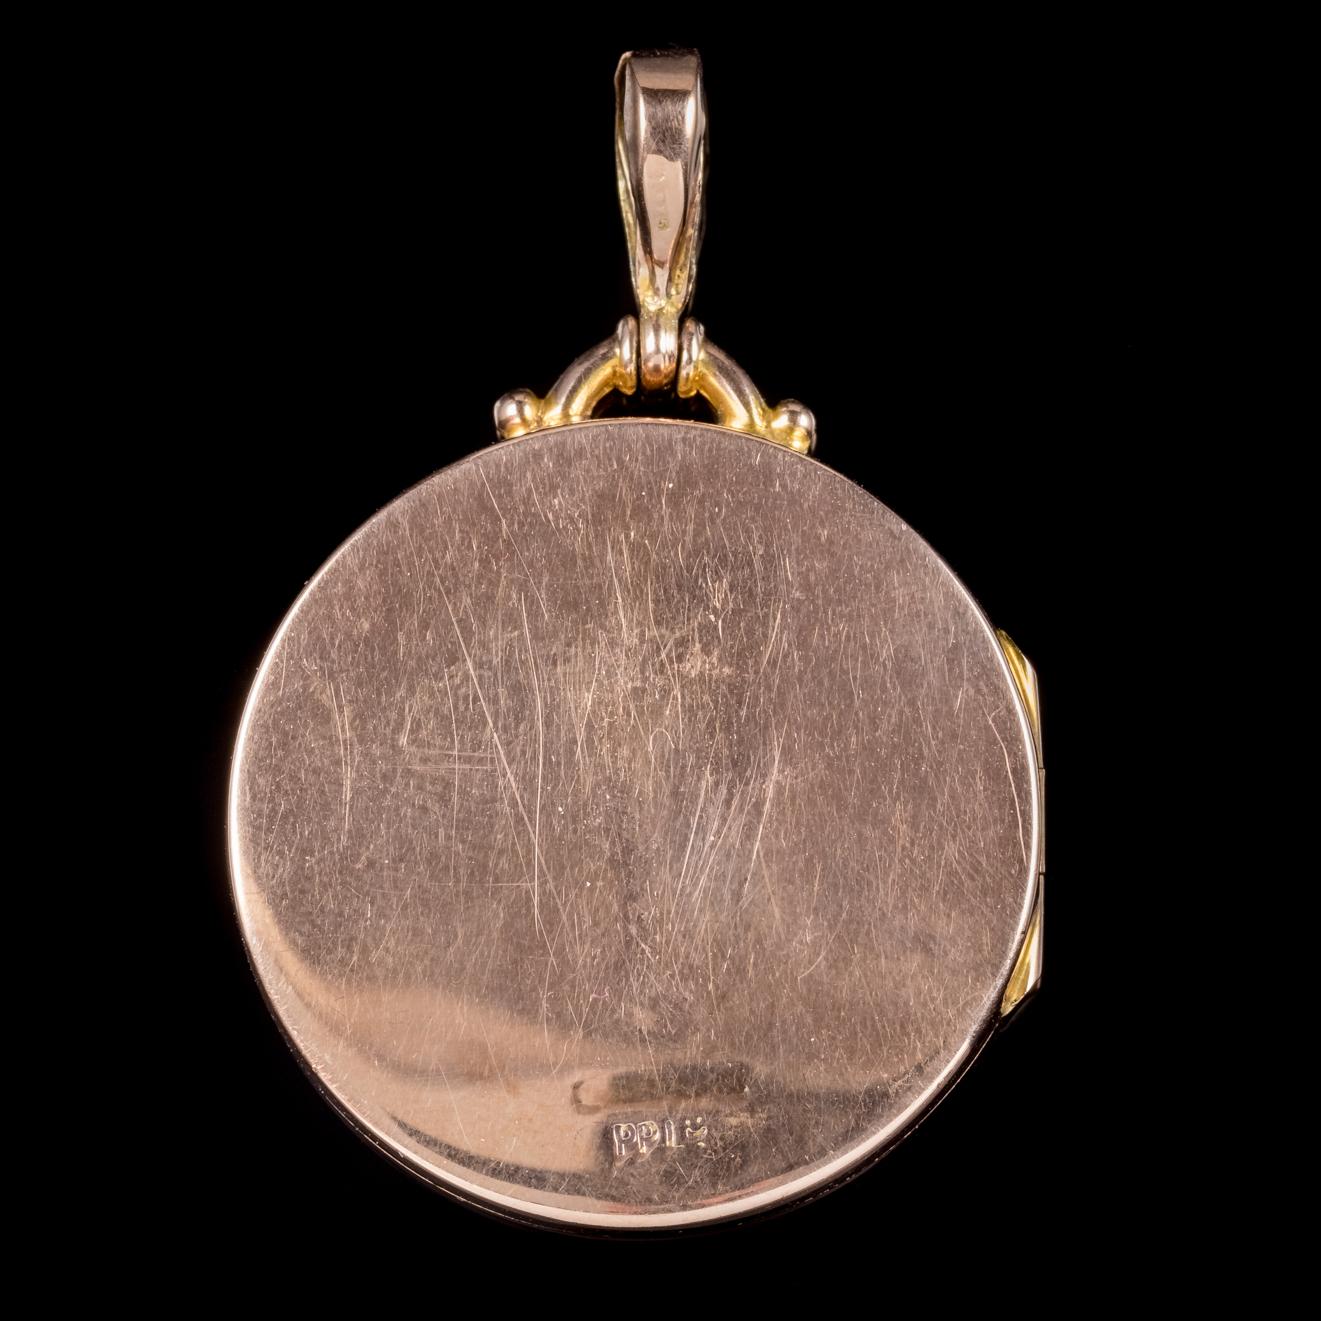 A lovely antique Victorian Locket C. 1900, engraved with a natural flowing design on the front which had been lovingly crafted in 9ct Rose Gold. 

The Locket is complete with windows and rims within so photographs of your treasured loved ones can be